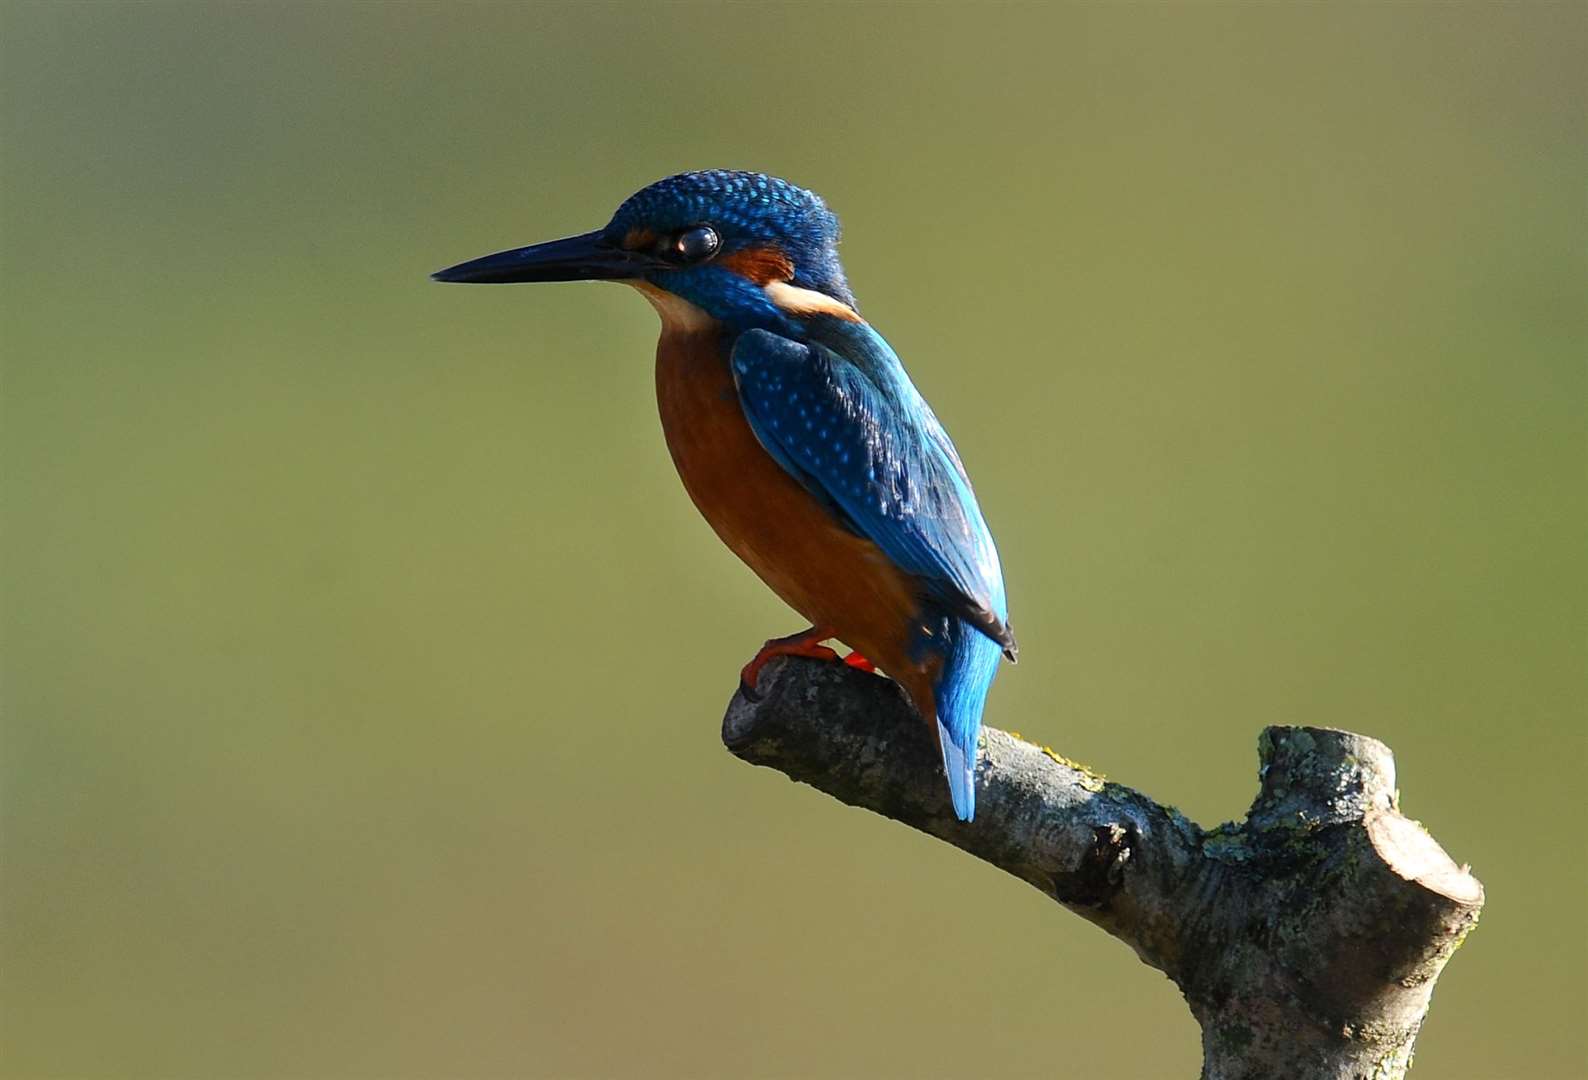 Wetlands are important areas of biodiversity vital for the survival of birds like the kingfisher (Clive Gee/PA)